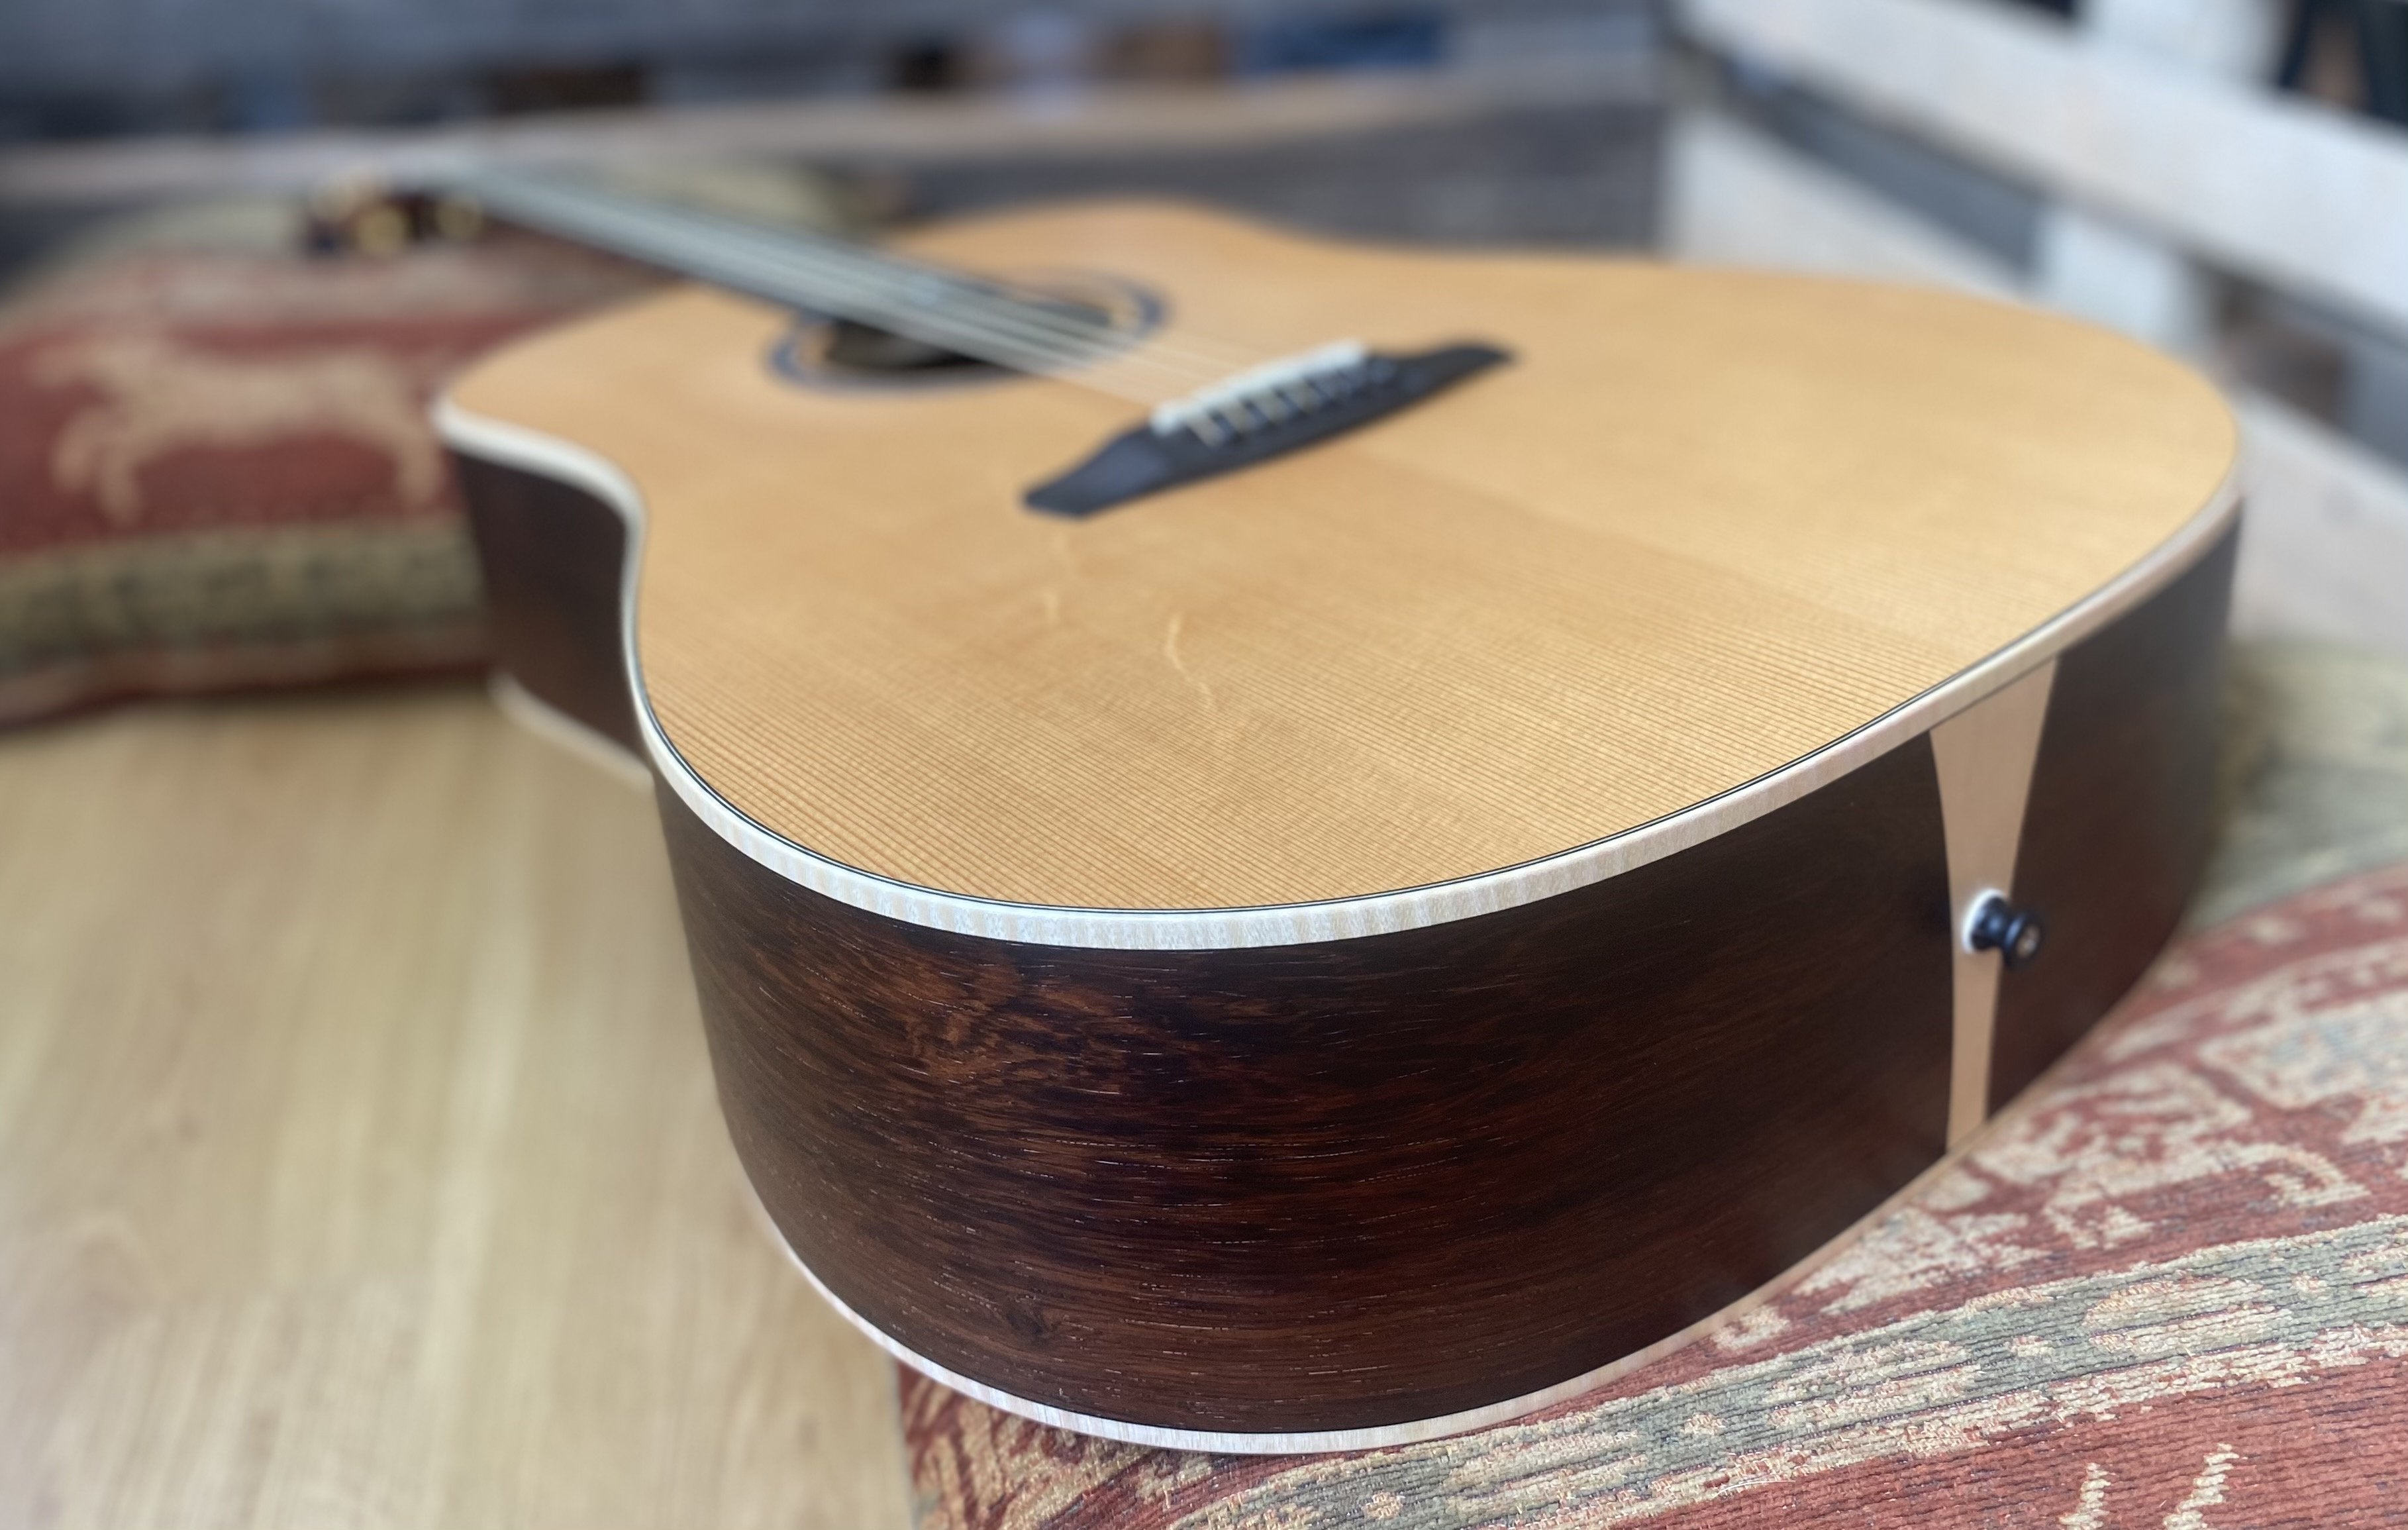 Dowina Master Build Madagascar Rosewood D-SWS, Acoustic Guitar for sale at Richards Guitars.